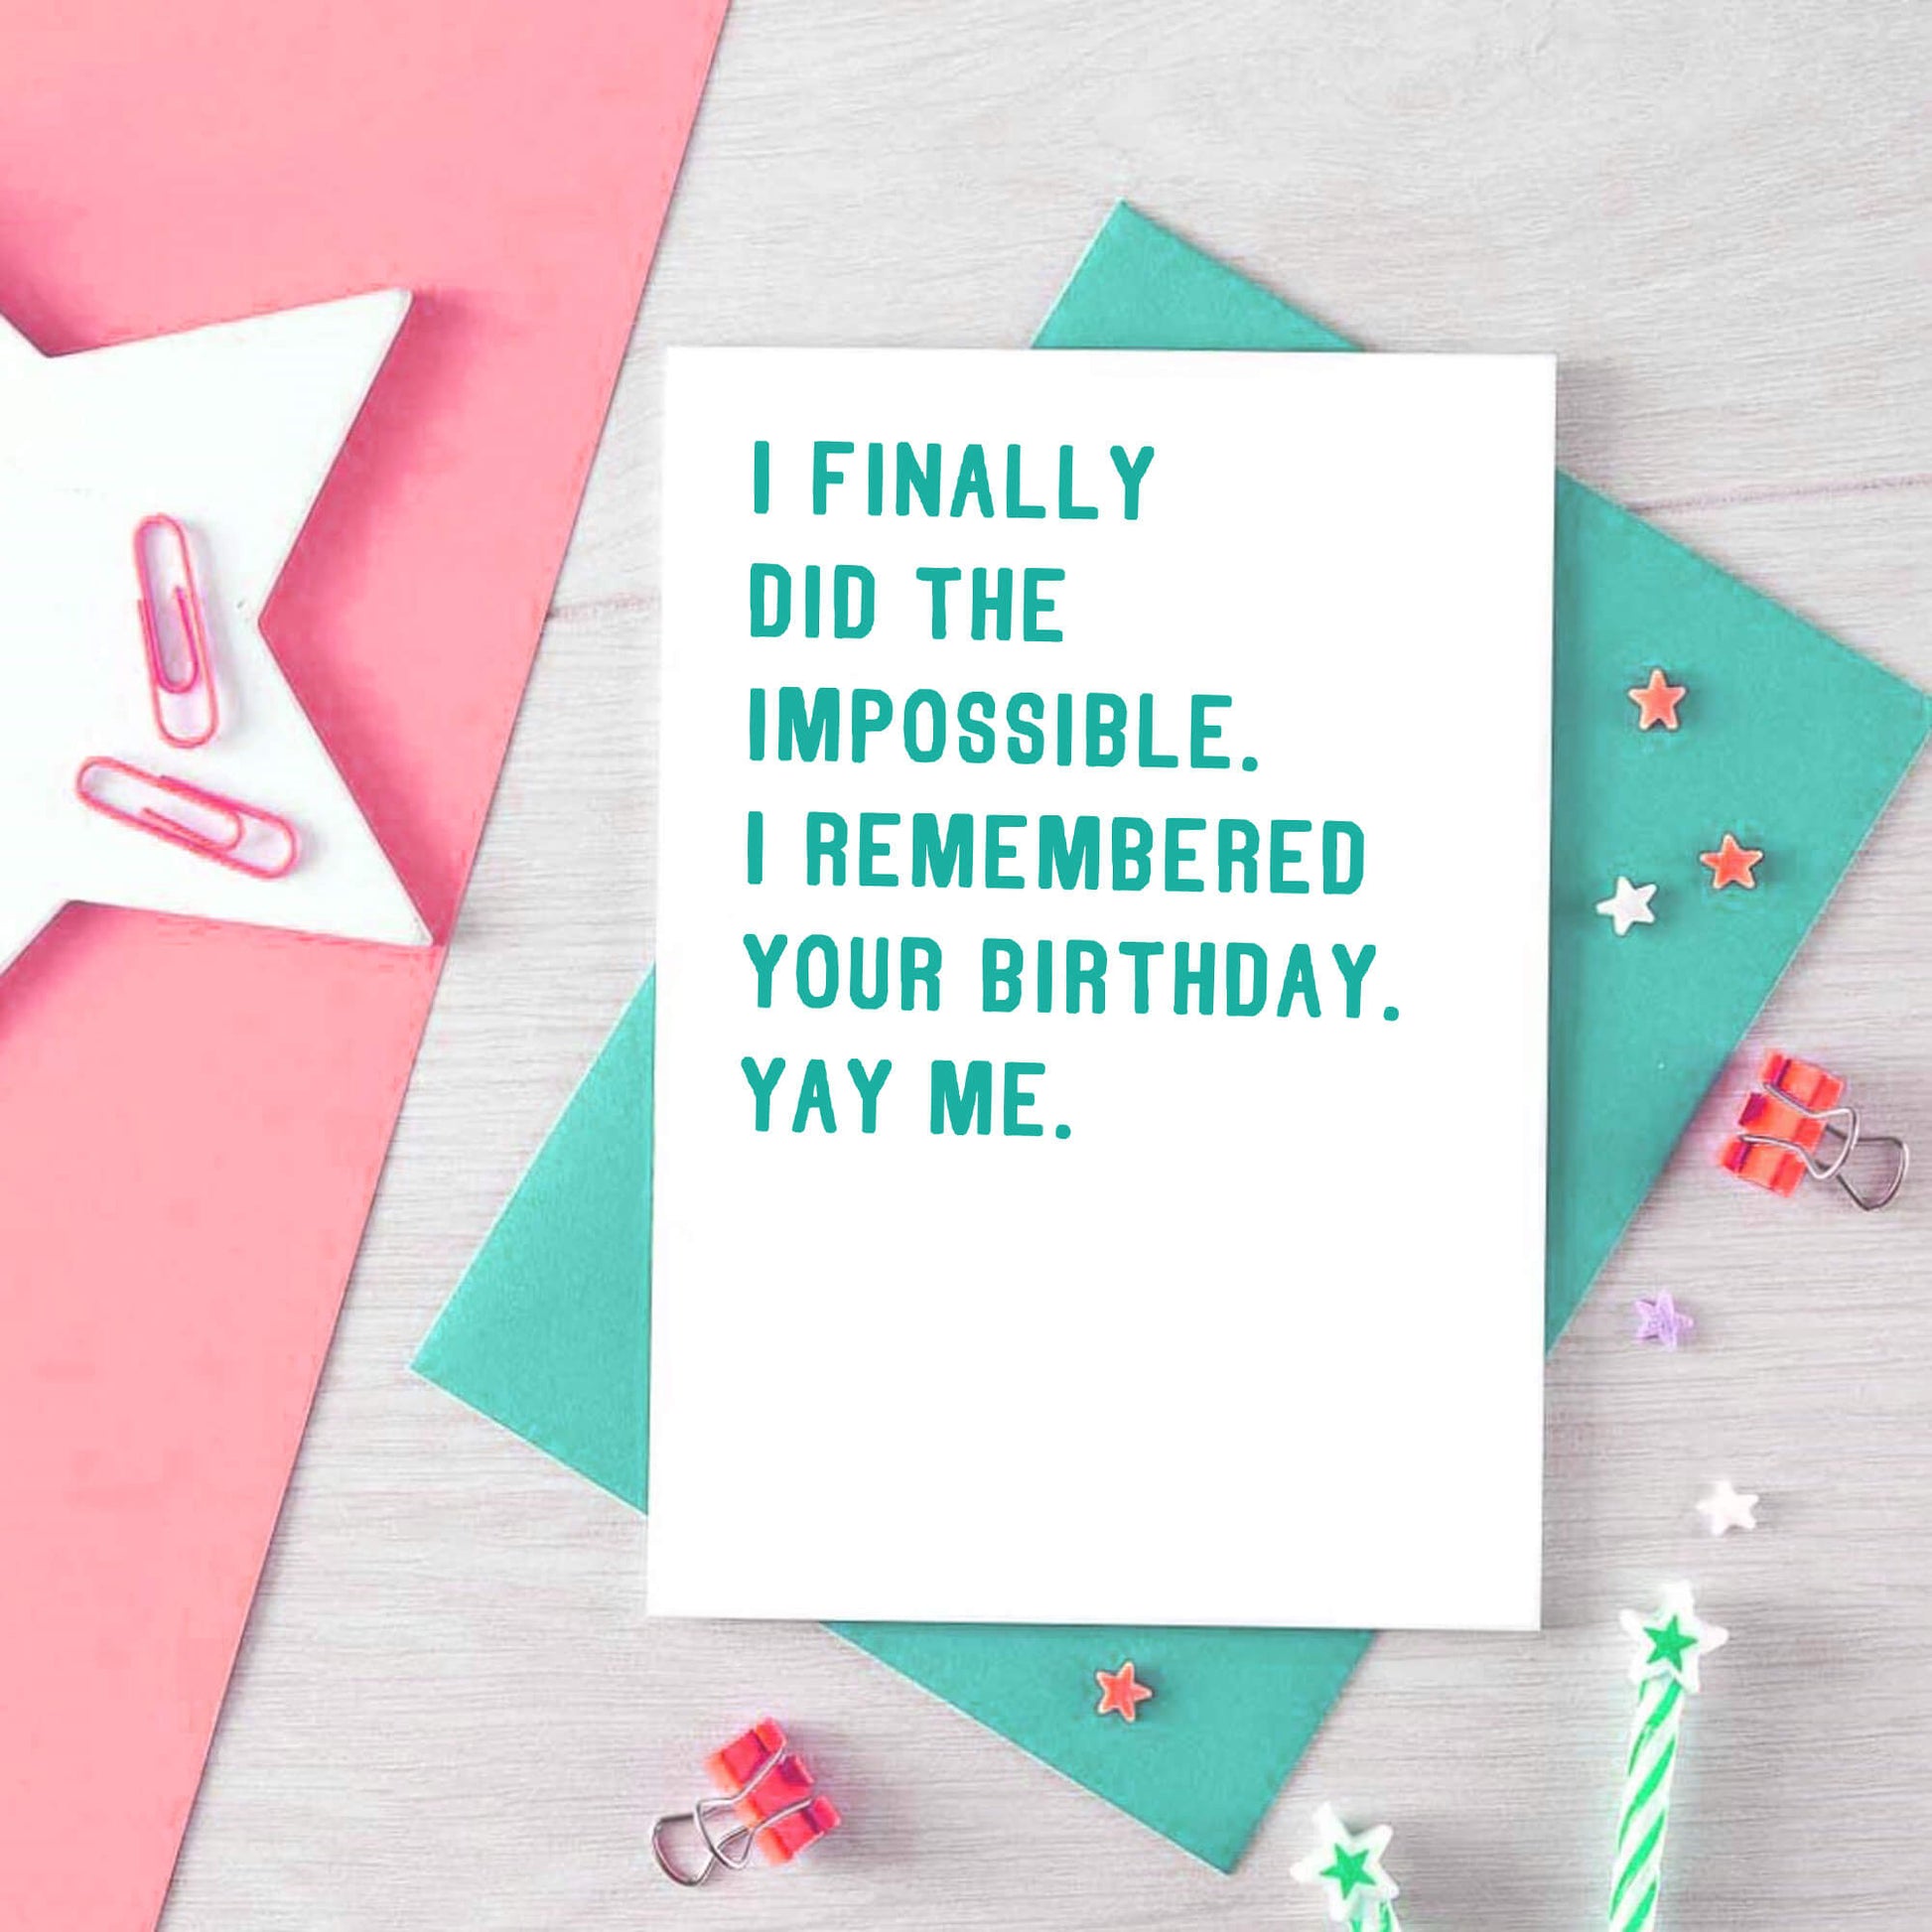 Birthday Card by SixElevenCreations. Reads I finally did the impossible. I remembered your birthday. Yay me. Product Code SE2001A6